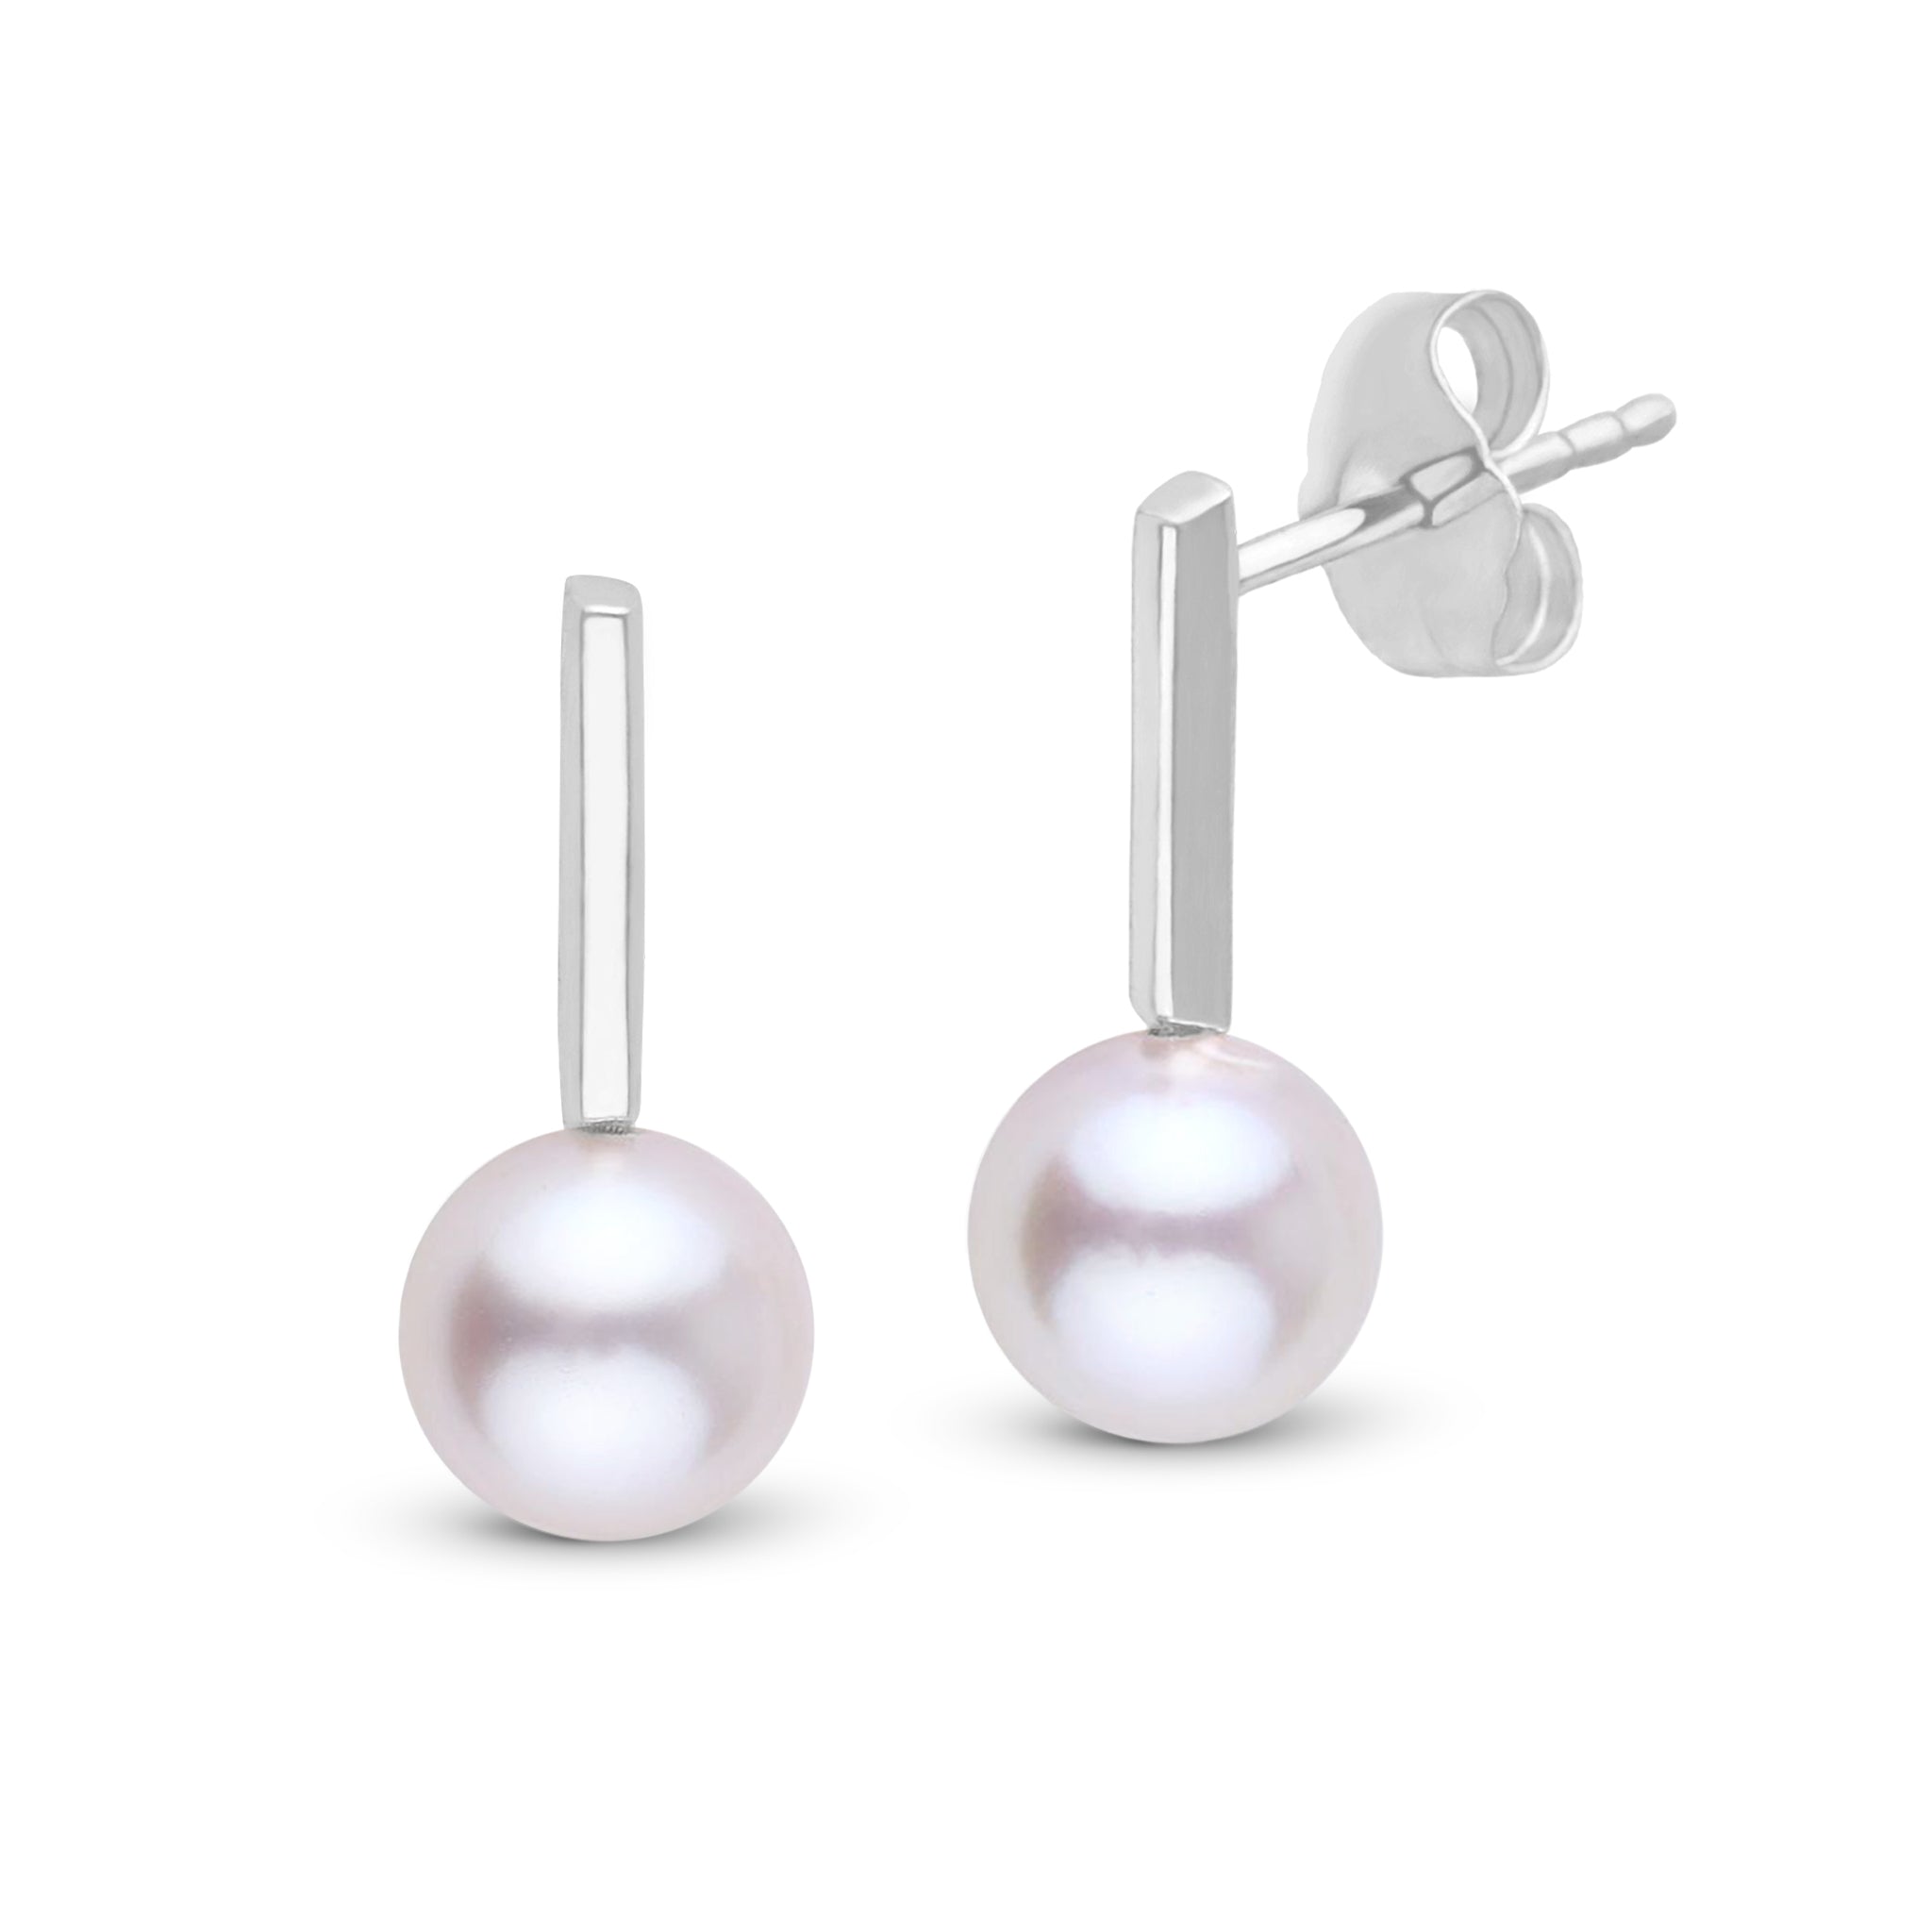 Petite Bar Collection 6.5-7.0 mm Akoya Pearl Earrings White Gold